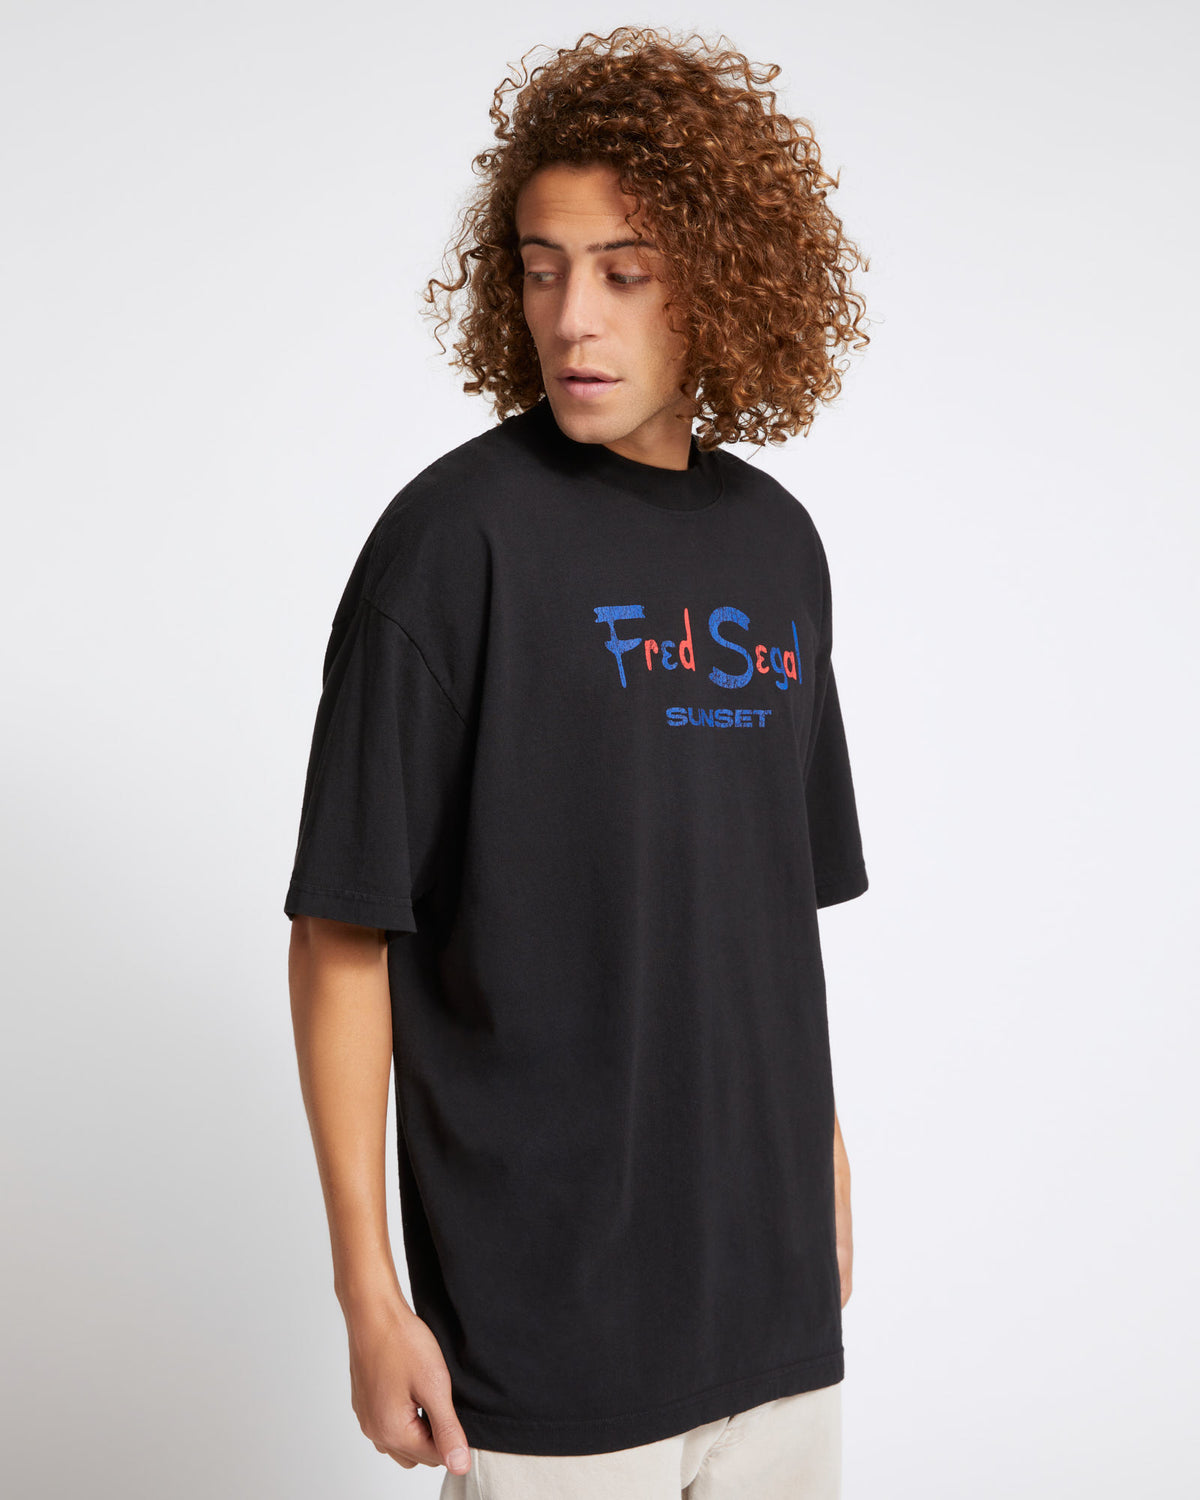 Fred Segal Sunset Tee